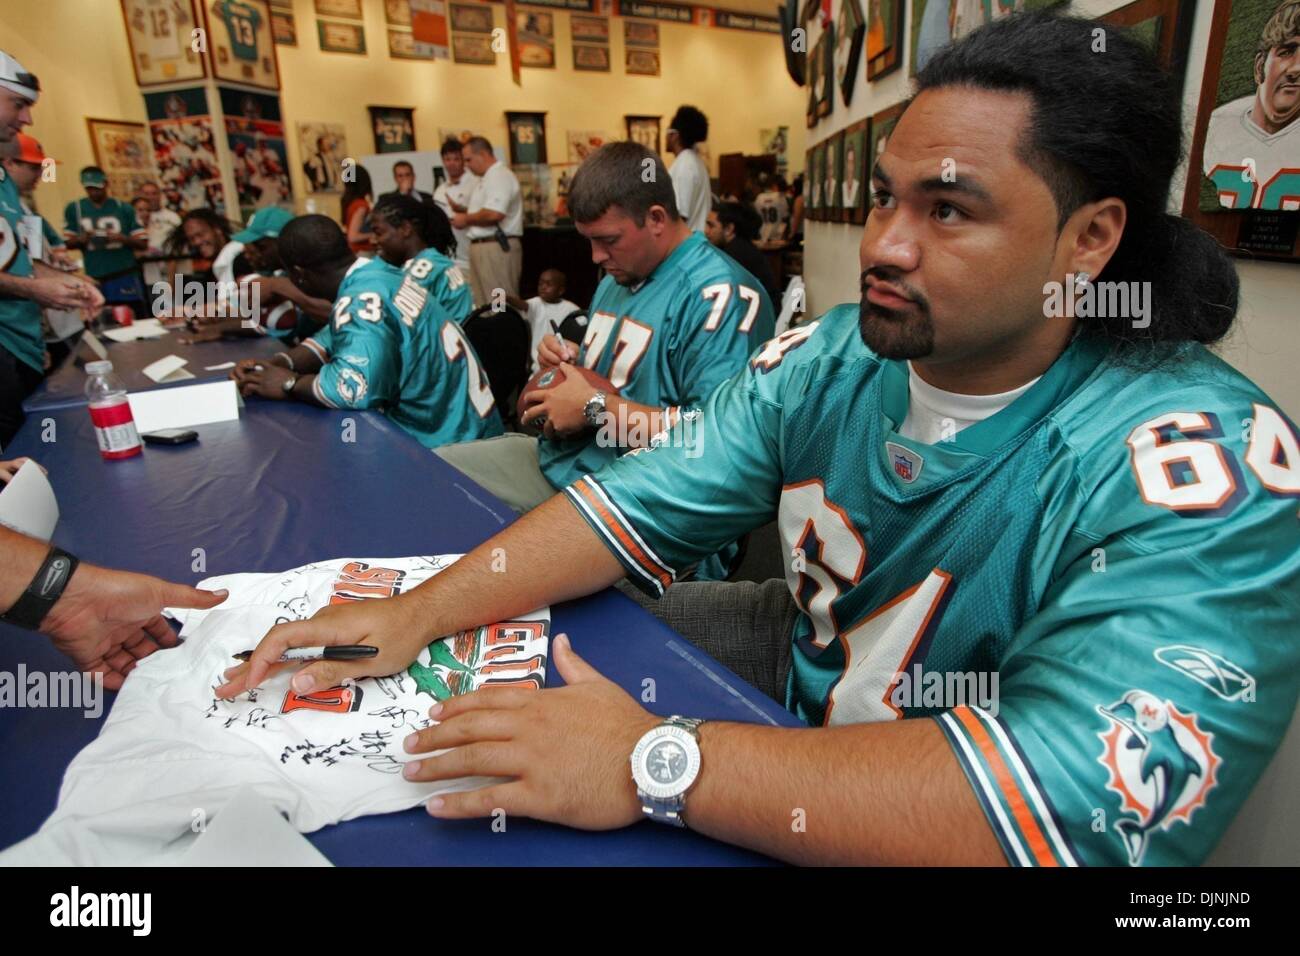 Apr 26, 2008 - Delray Beach, Florida, USA - SAMSON SATELE signs autographs at the Dolphin's draft party held at Dolphin Stadium.  (Credit Image: Â© Lannis Waters/Palm Beach Post/ZUMA Press) RESTRICTIONS: * U.S. Tabloid Rights OUT * Stock Photo